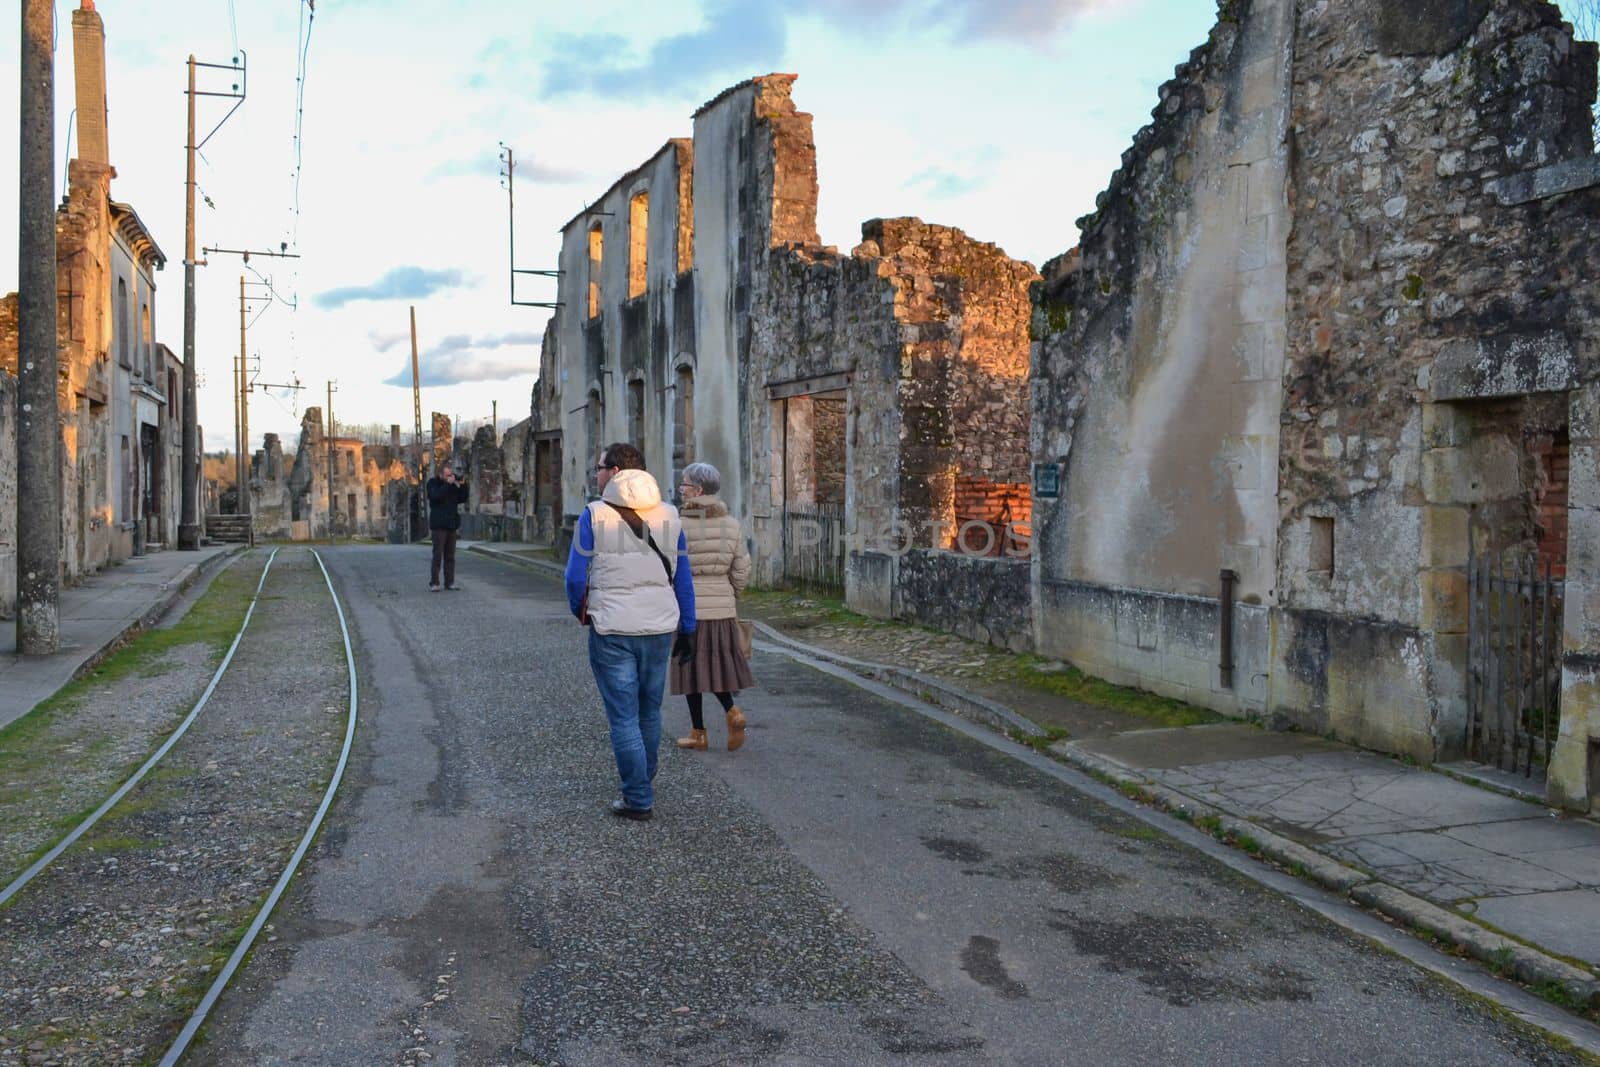 The people near destroyed building during World War 2 in Oradour- sur -Glane France by Godi